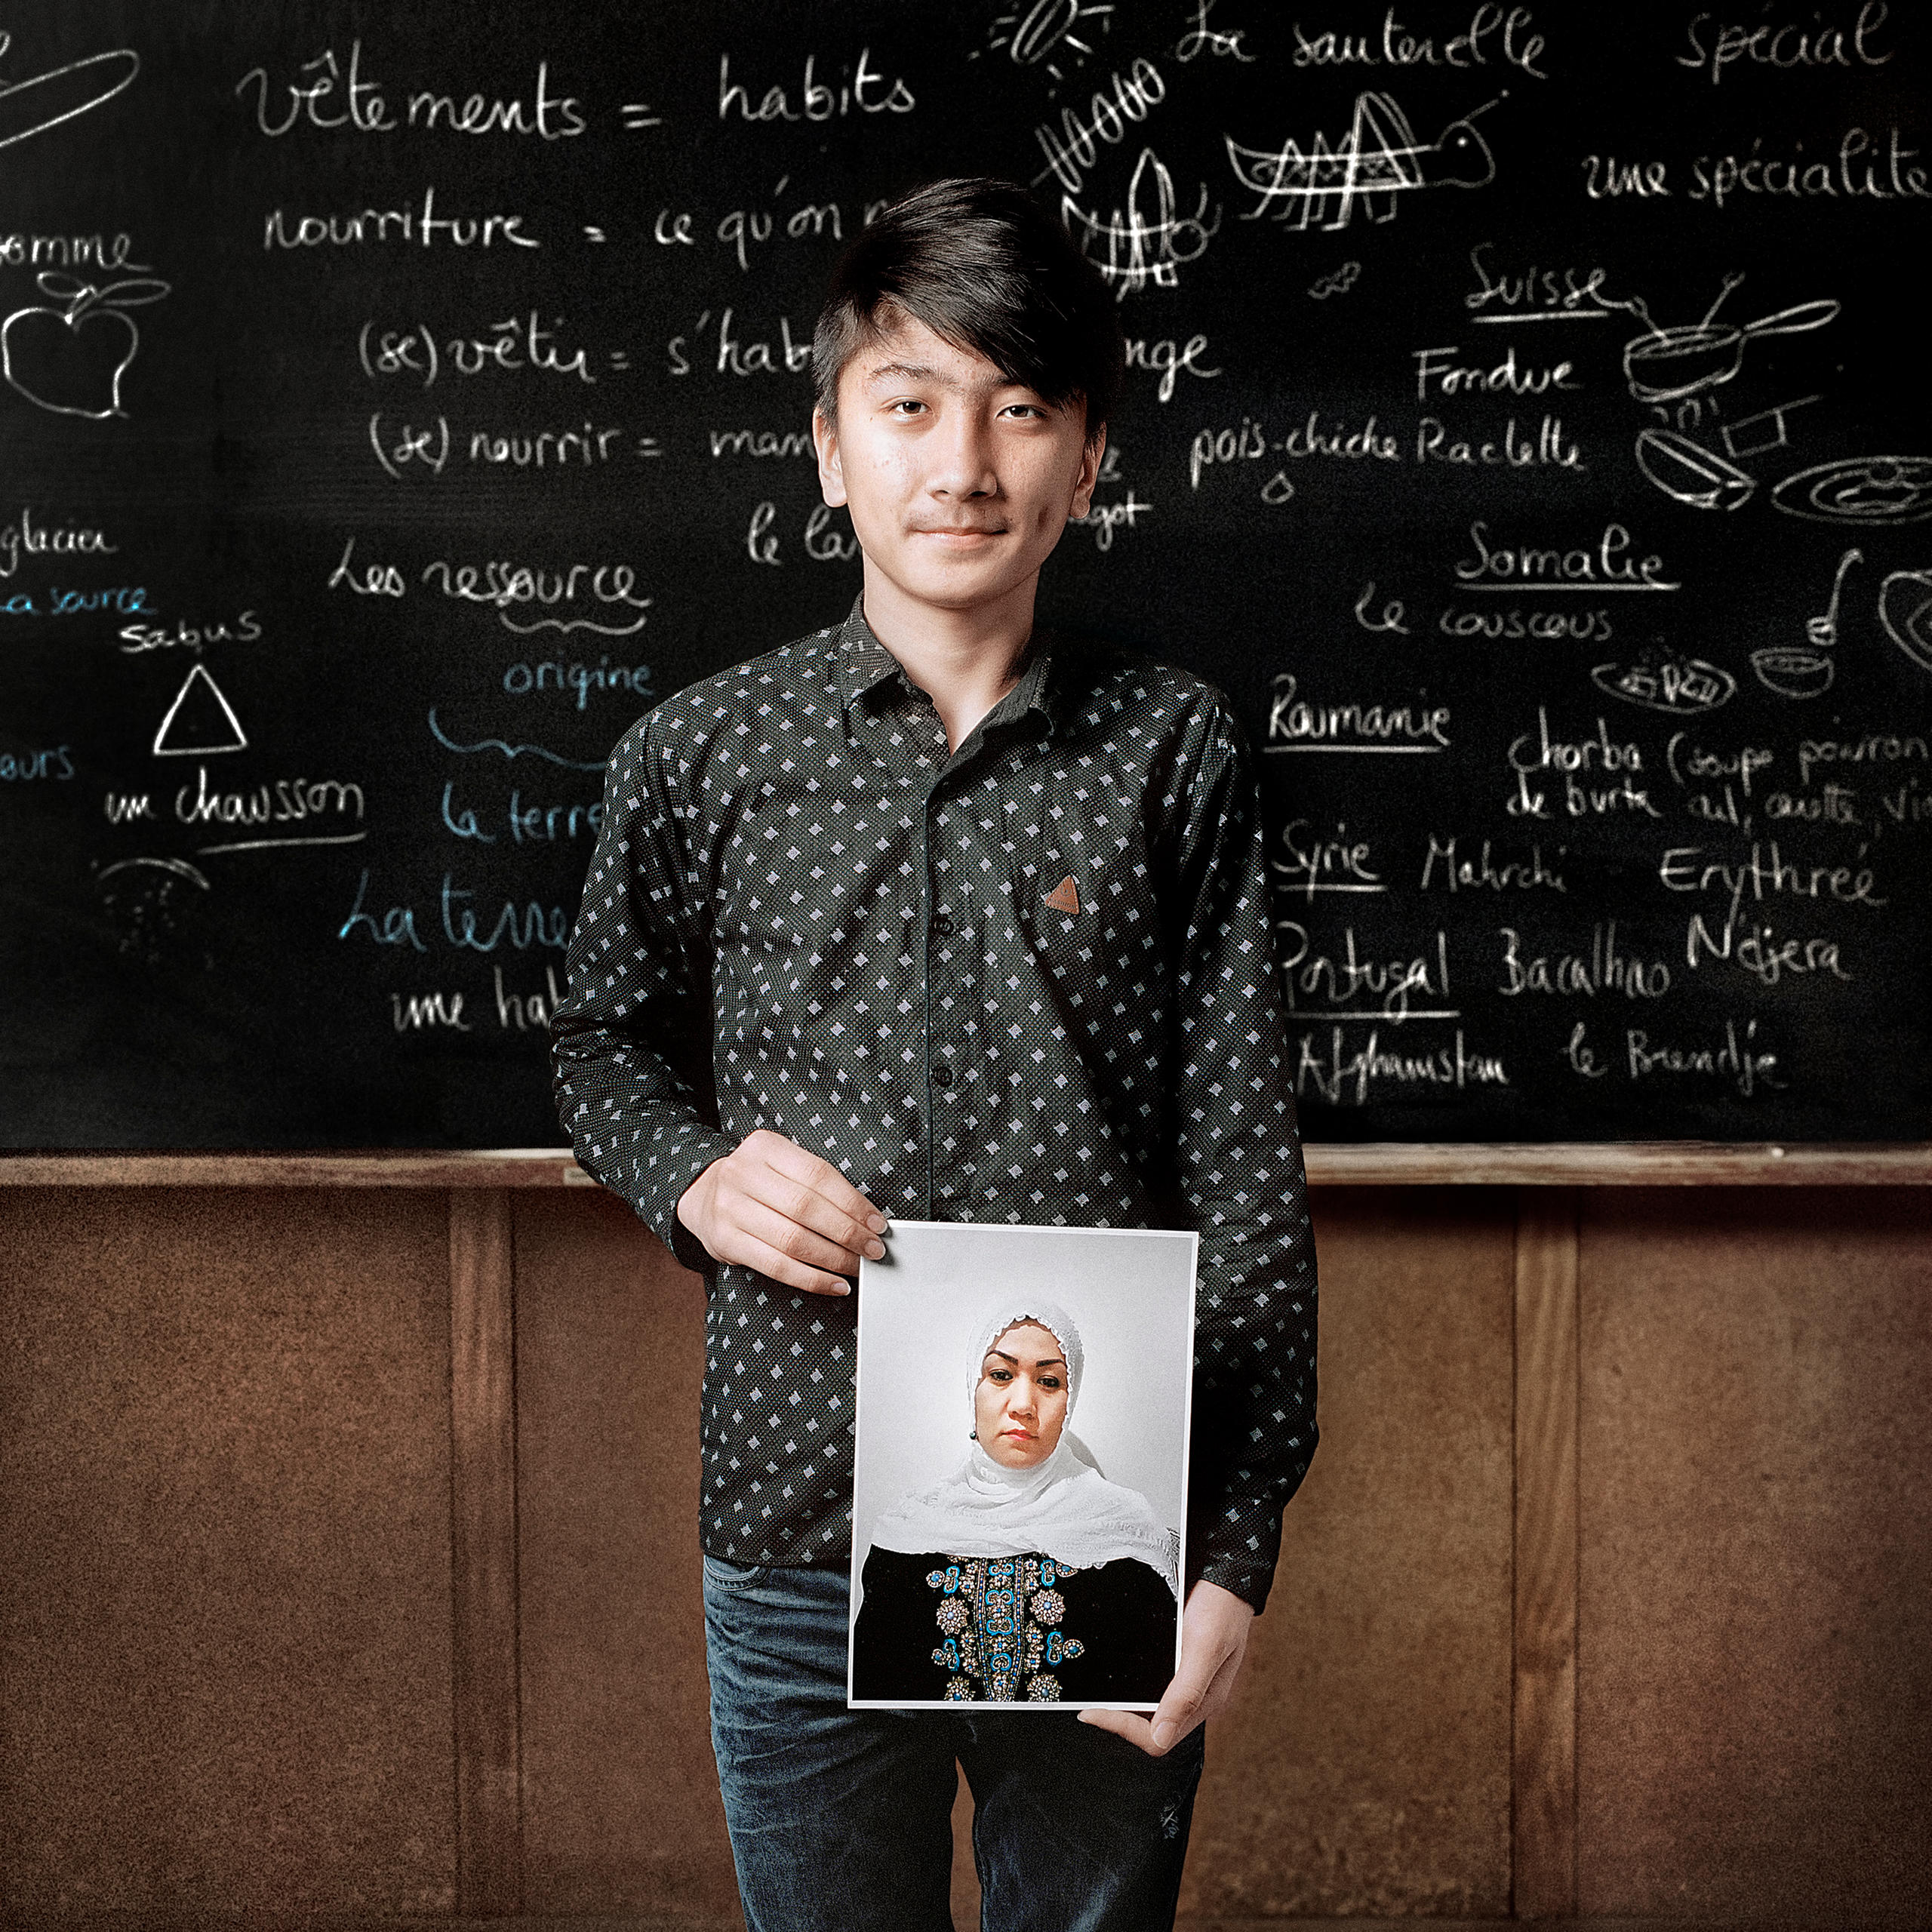 teenager stands in front of blackboard holding a photo